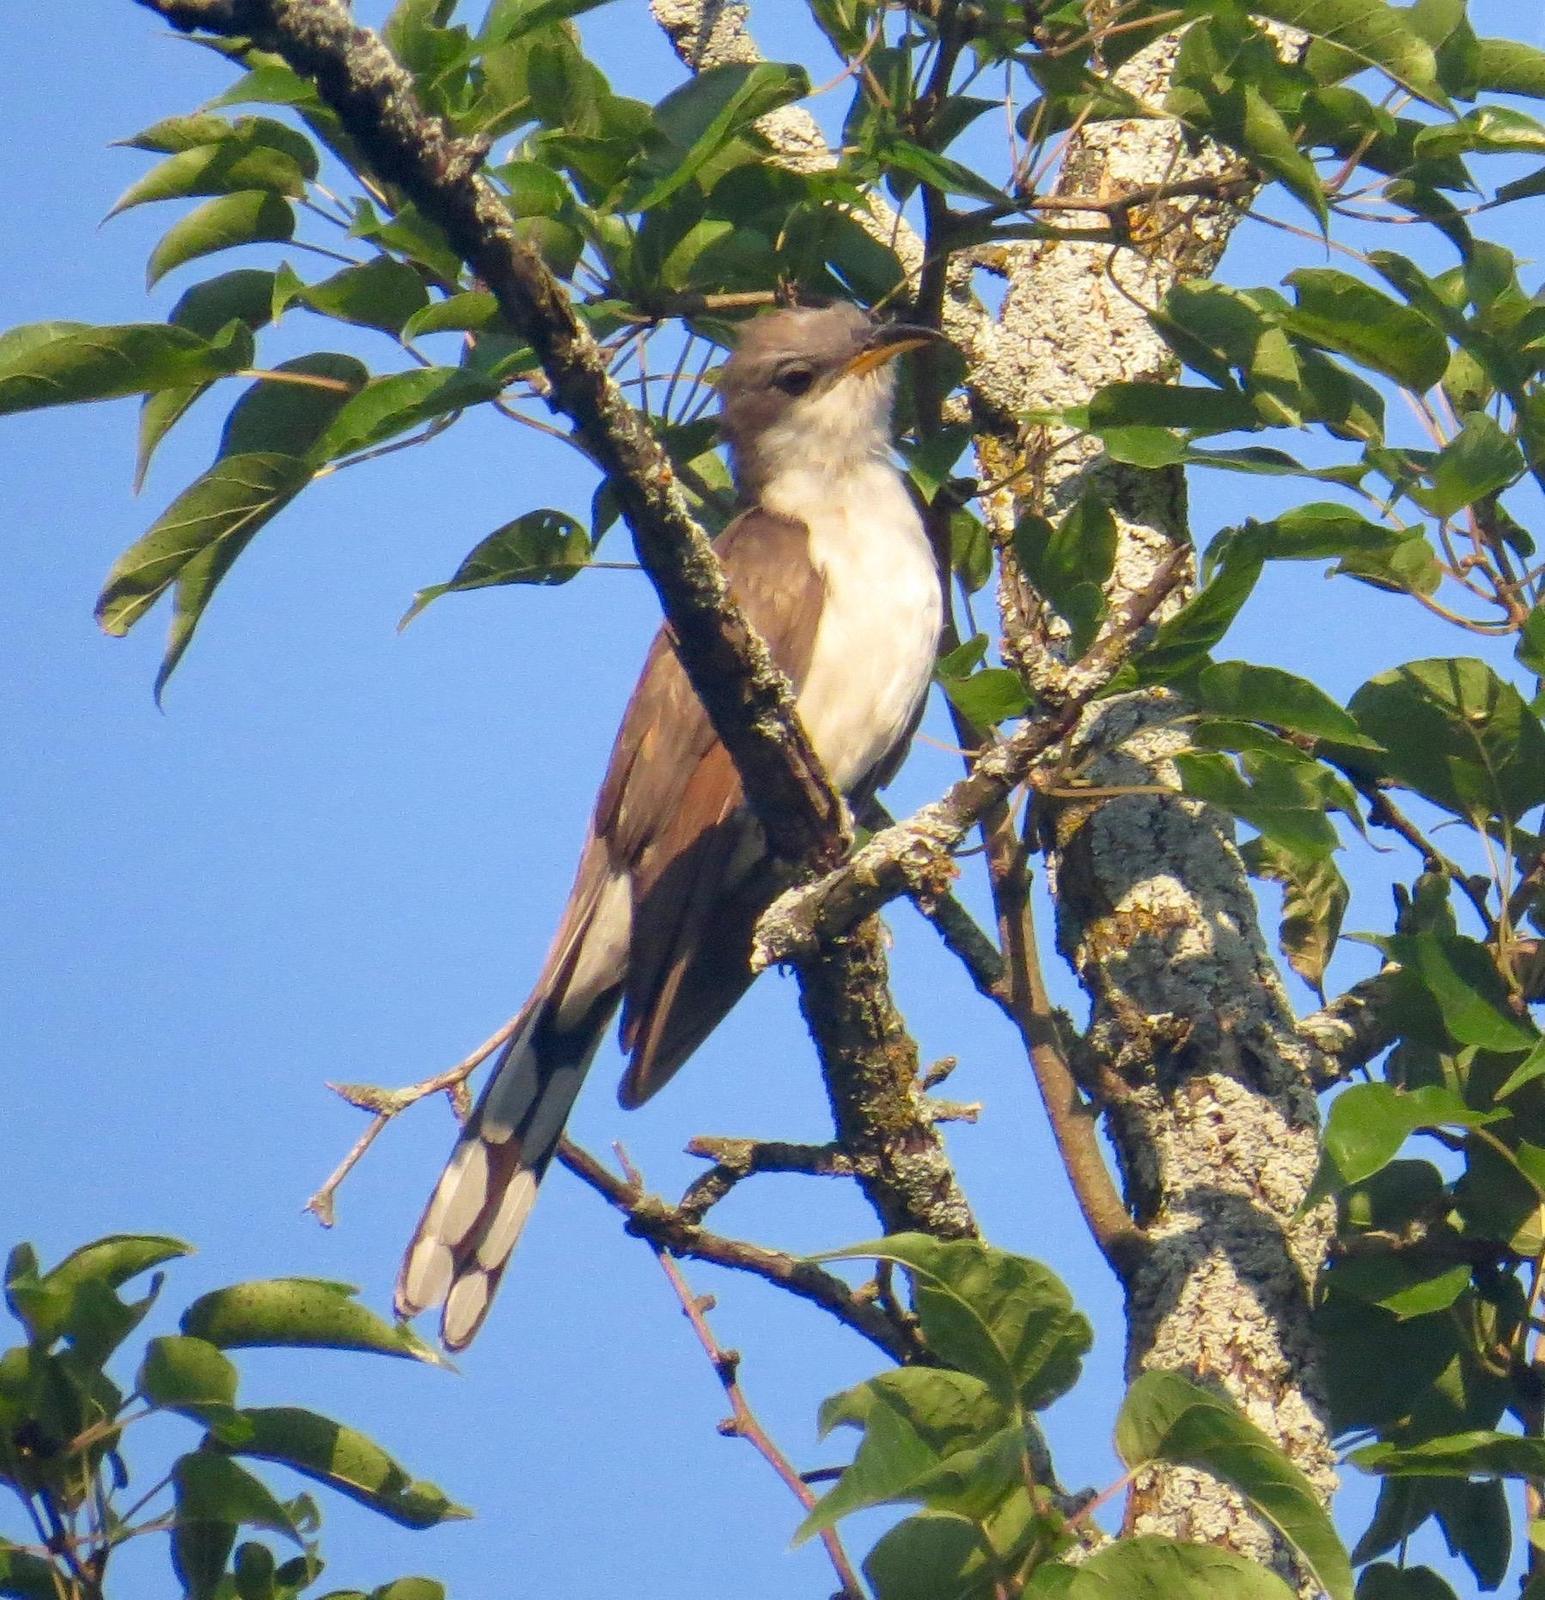 Yellow-billed Cuckoo Photo by Don Glasco